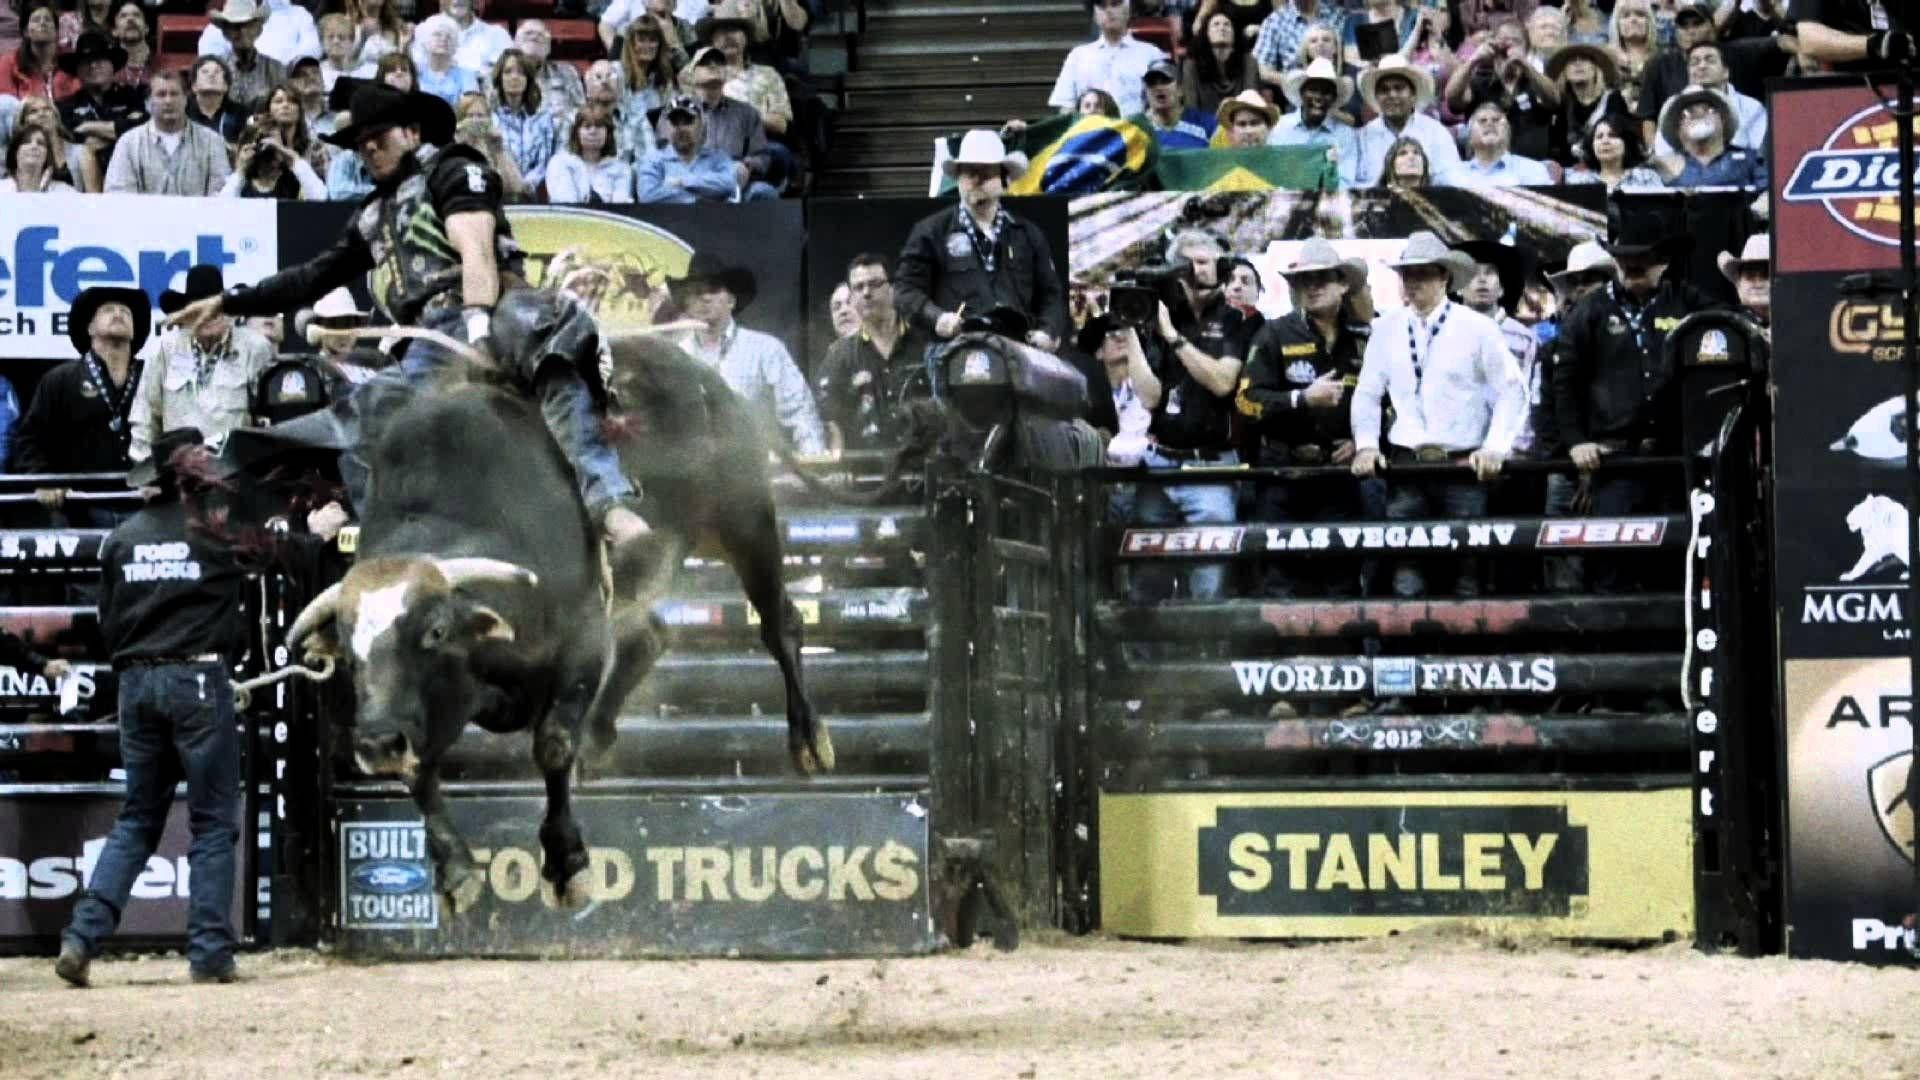 Bull Riding: A Thrilling Activity That Isn't For The Faint Of Heart Background